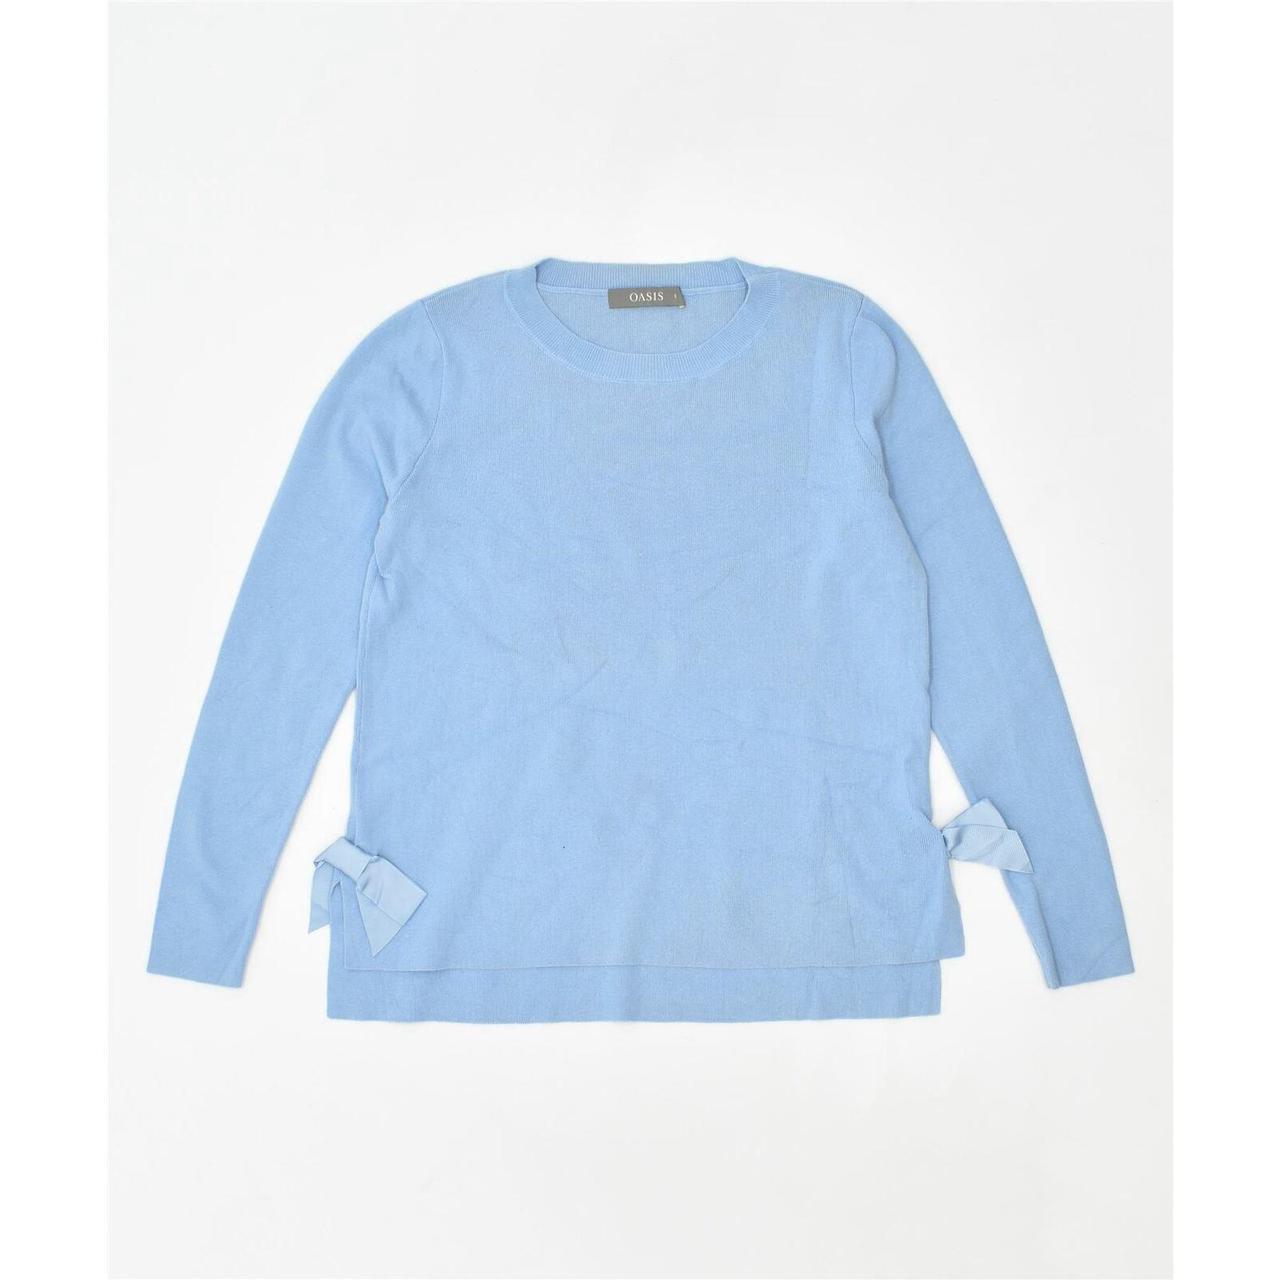 Product Image 1 - OASIS Womens Crew Neck Jumper